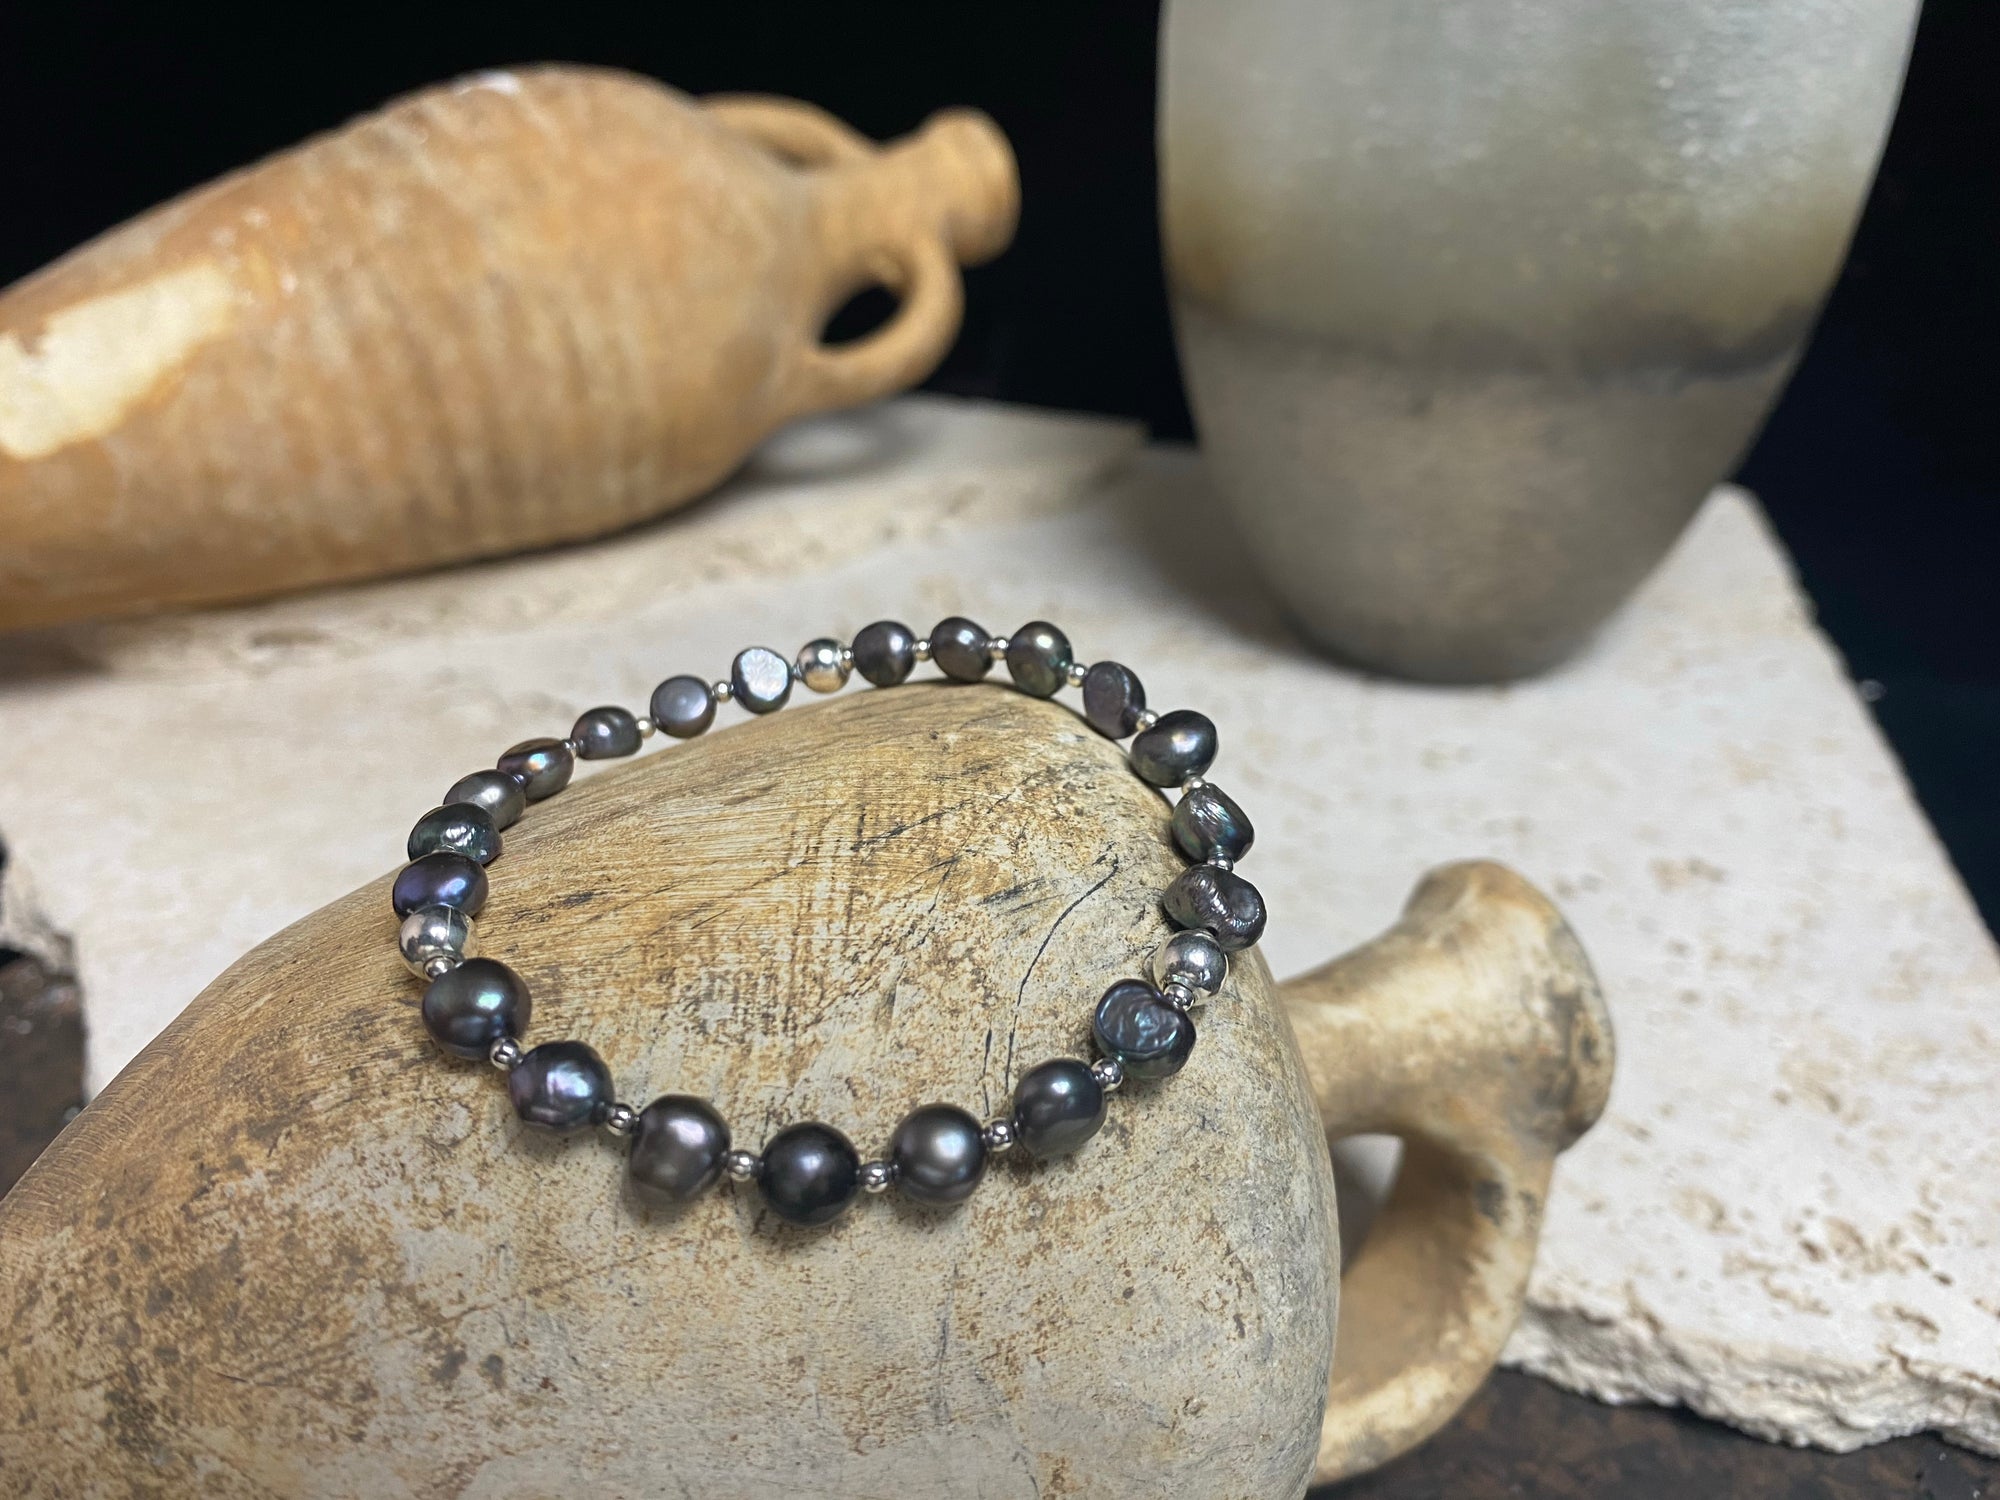 Grey black freshwater pearl bracelet with sterling silver bead detailing. Elasticised stringing for a seamless look. Length 19 cm